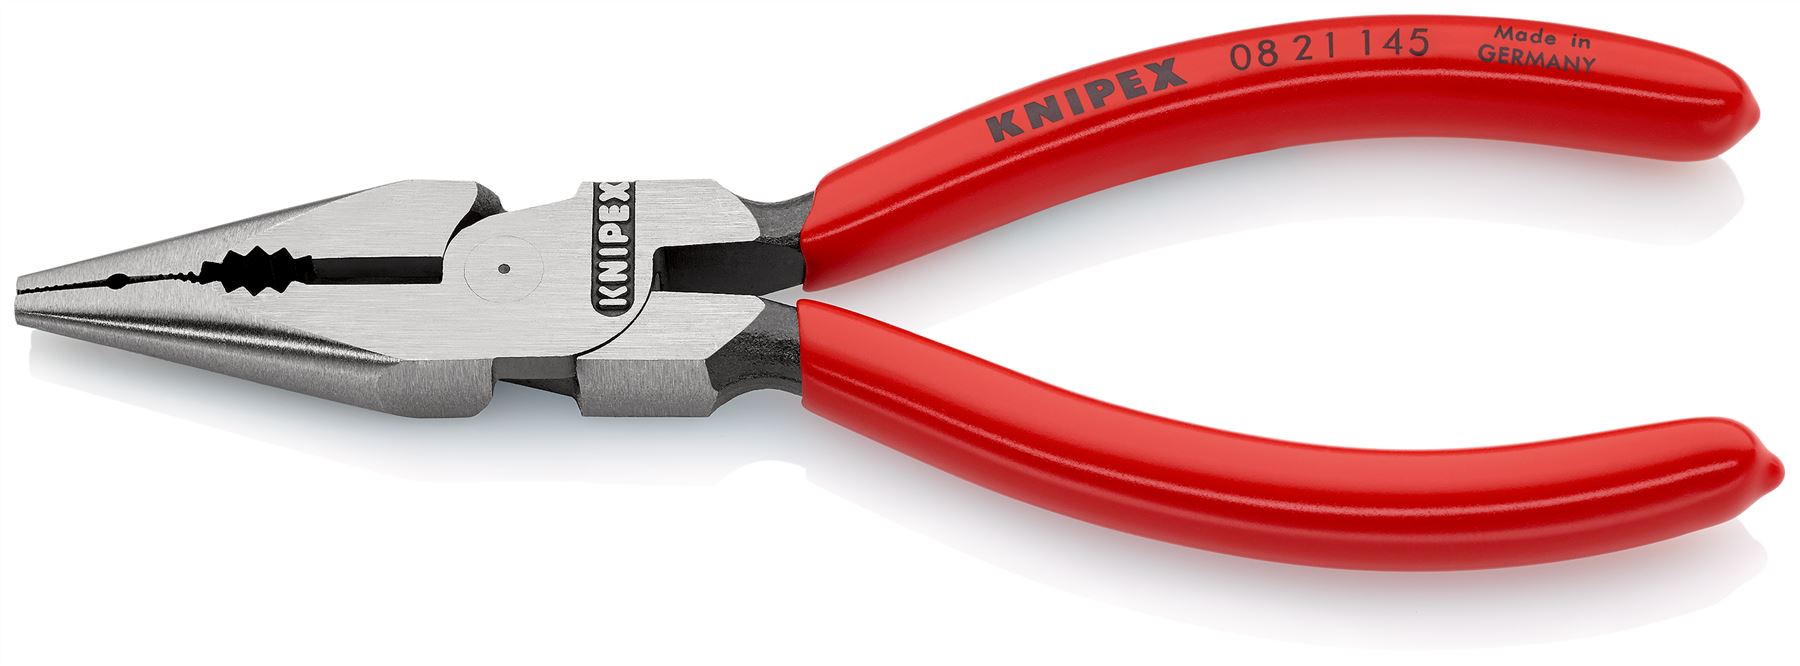 KNIPEX Needle Nose Combination Pliers 145mm Plastic Coated 08 21 145